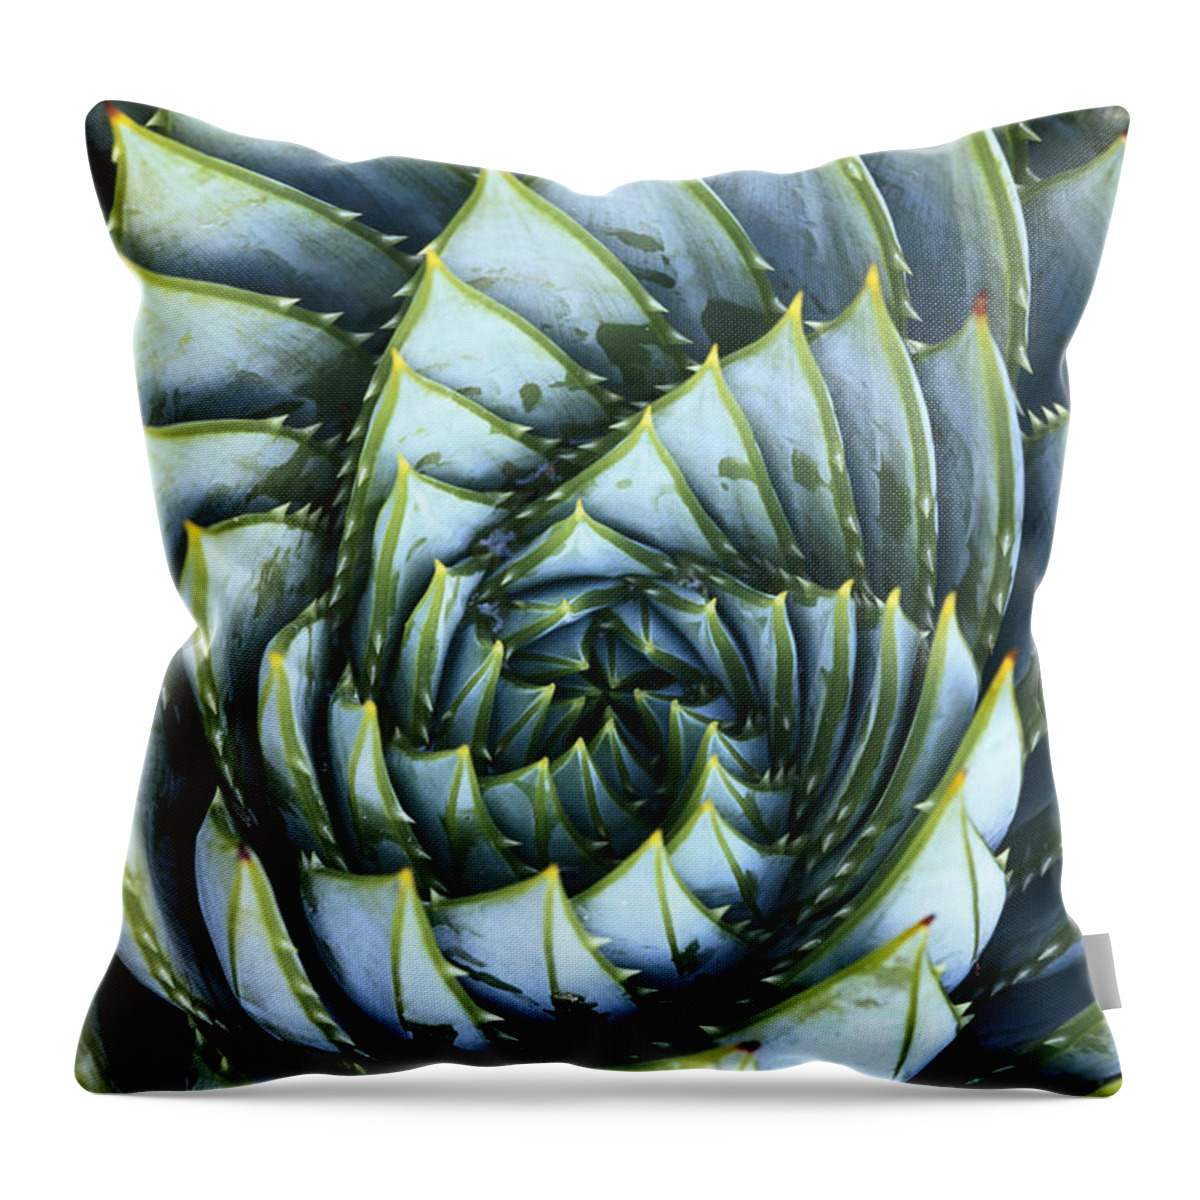 Spiral Throw Pillow featuring the photograph Spiral Aloe by Saxon Holt